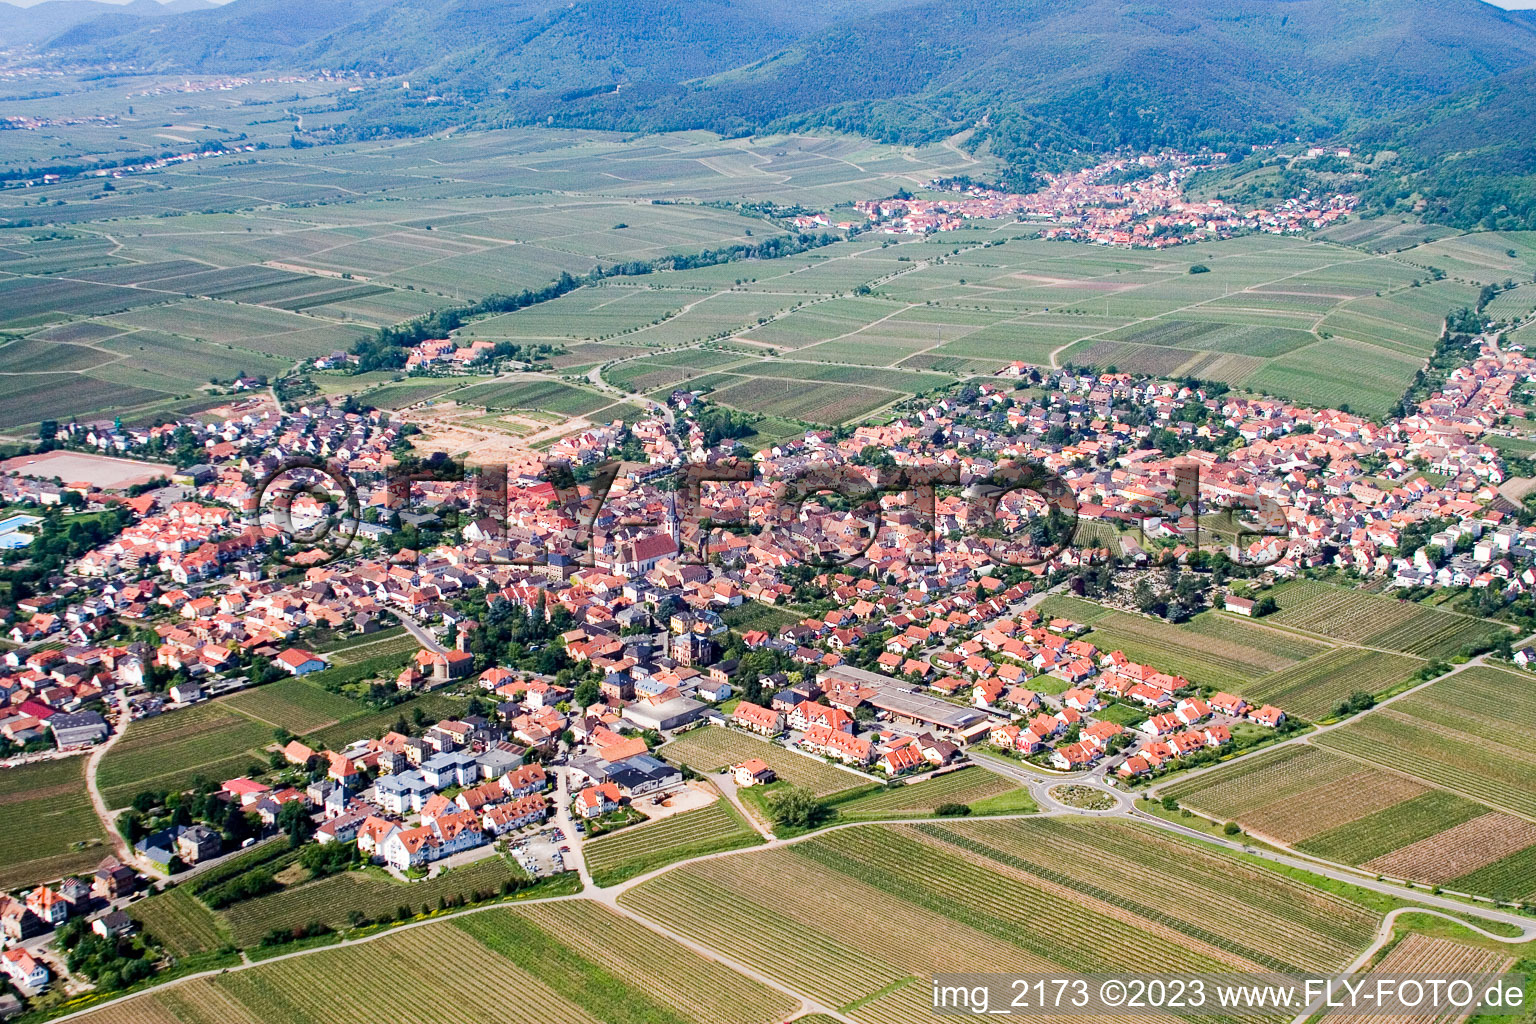 Aerial photograpy of Maikammer in the state Rhineland-Palatinate, Germany